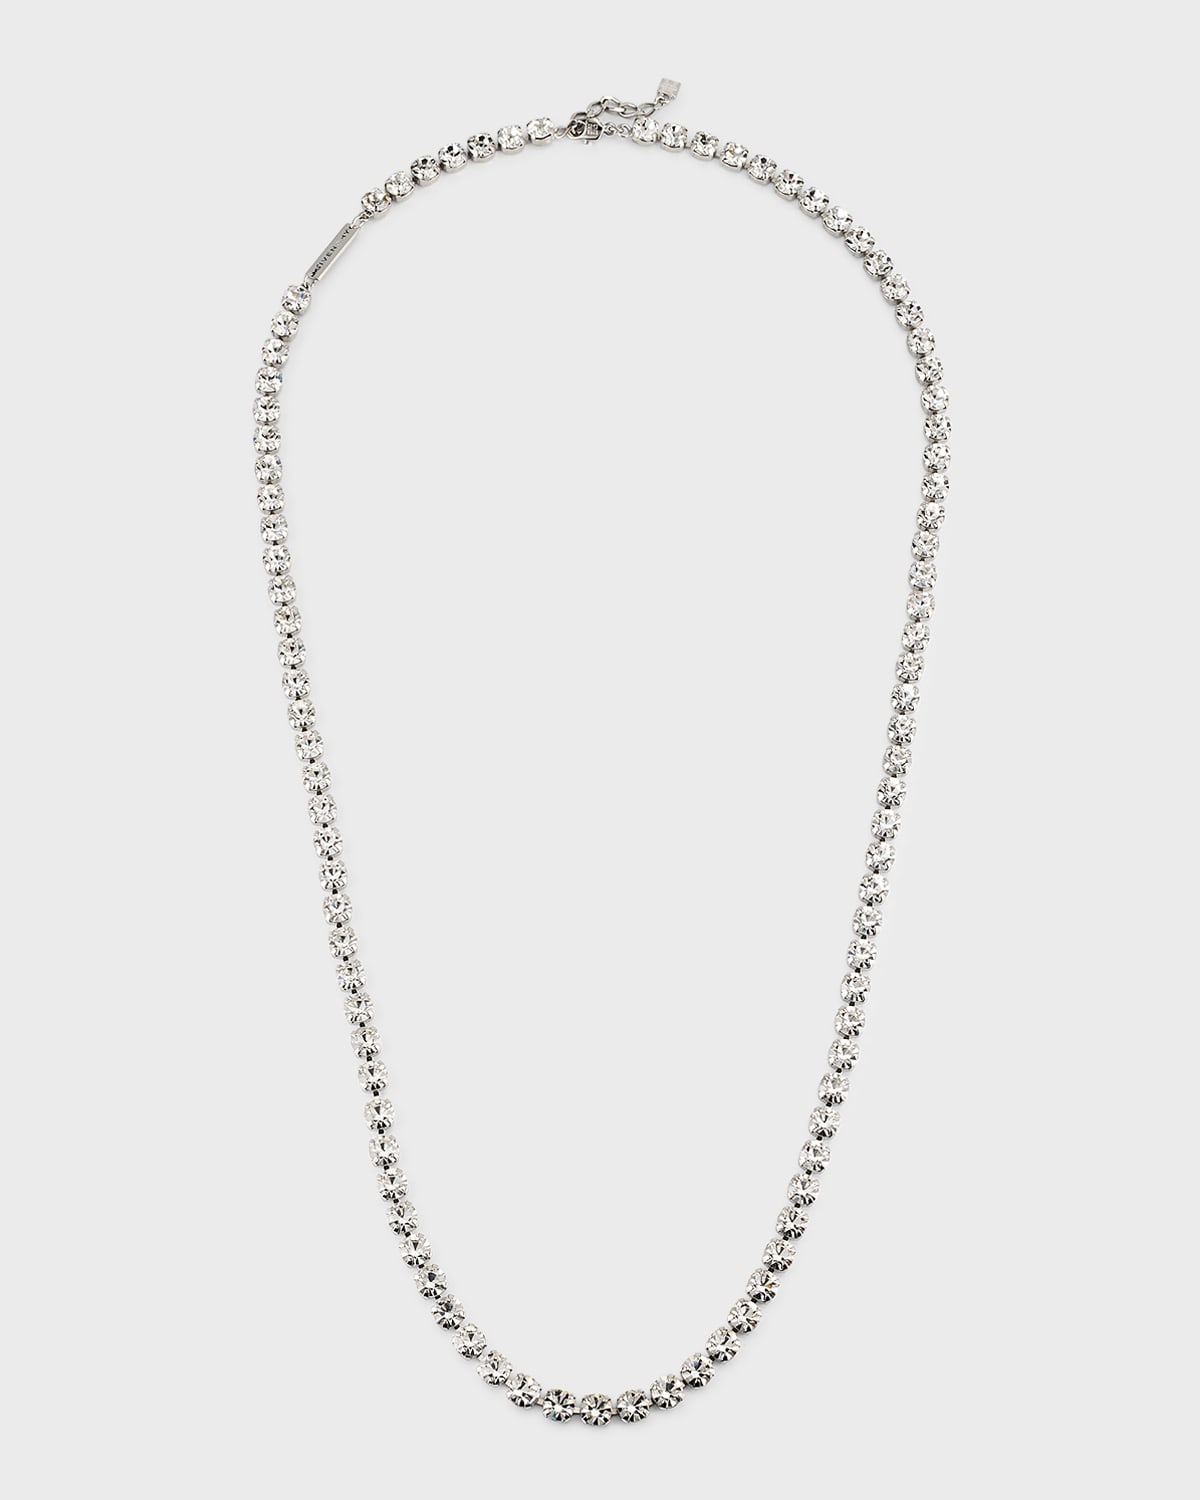 GIVENCHY MEN'S 4G CRYSTAL LONG NECKLACE